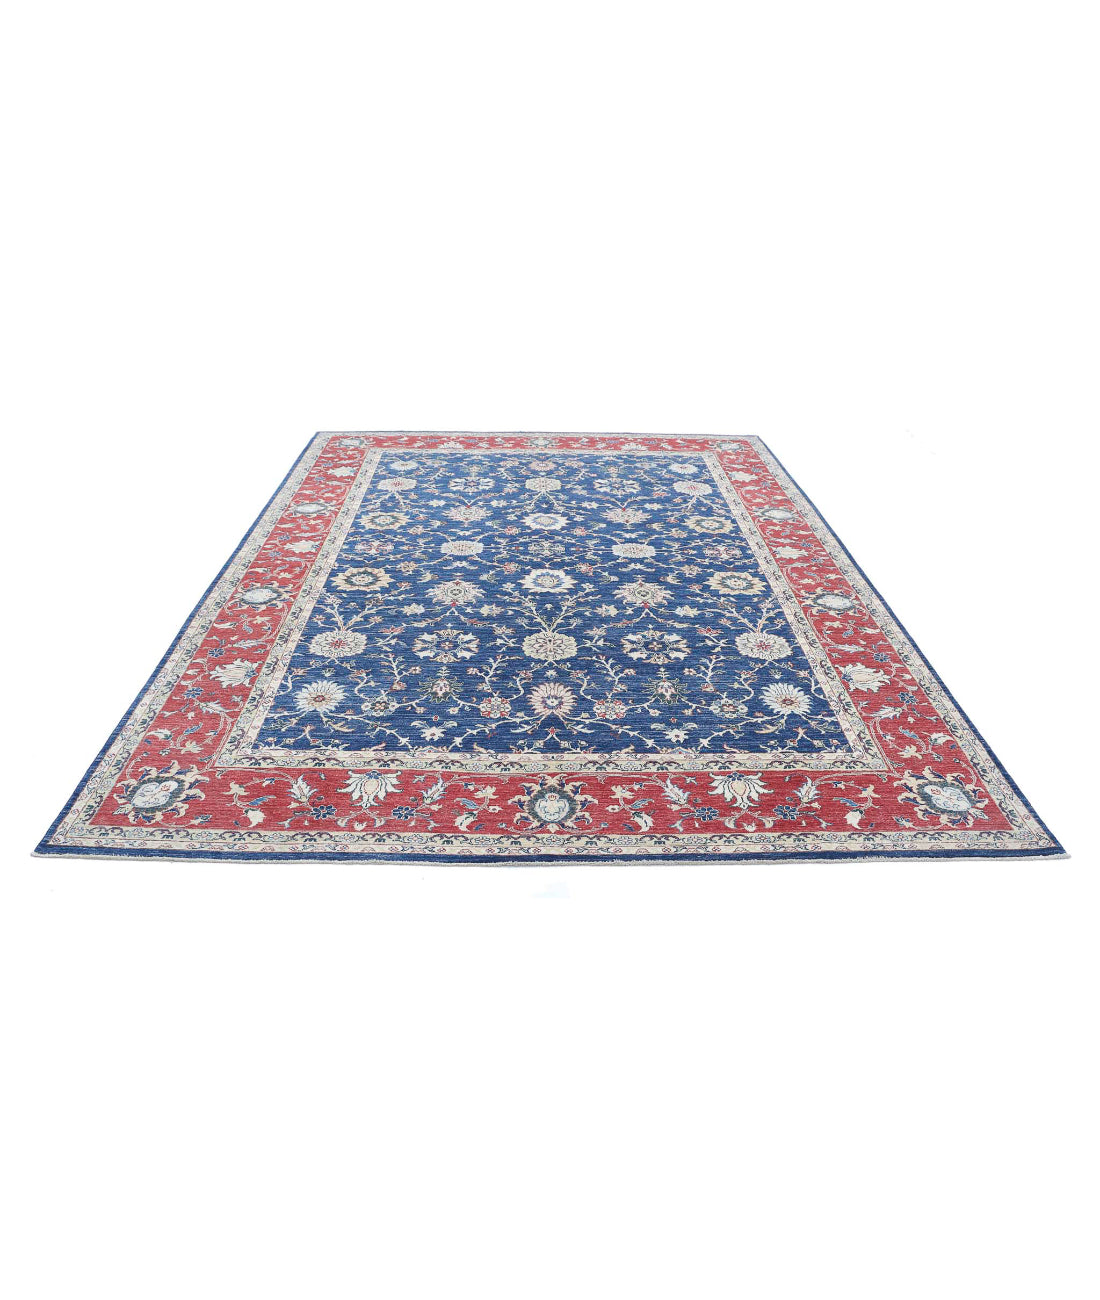 Ziegler 8'3'' X 10'9'' Hand-Knotted Wool Rug 8'3'' x 10'9'' (248 X 323) / Blue / Red